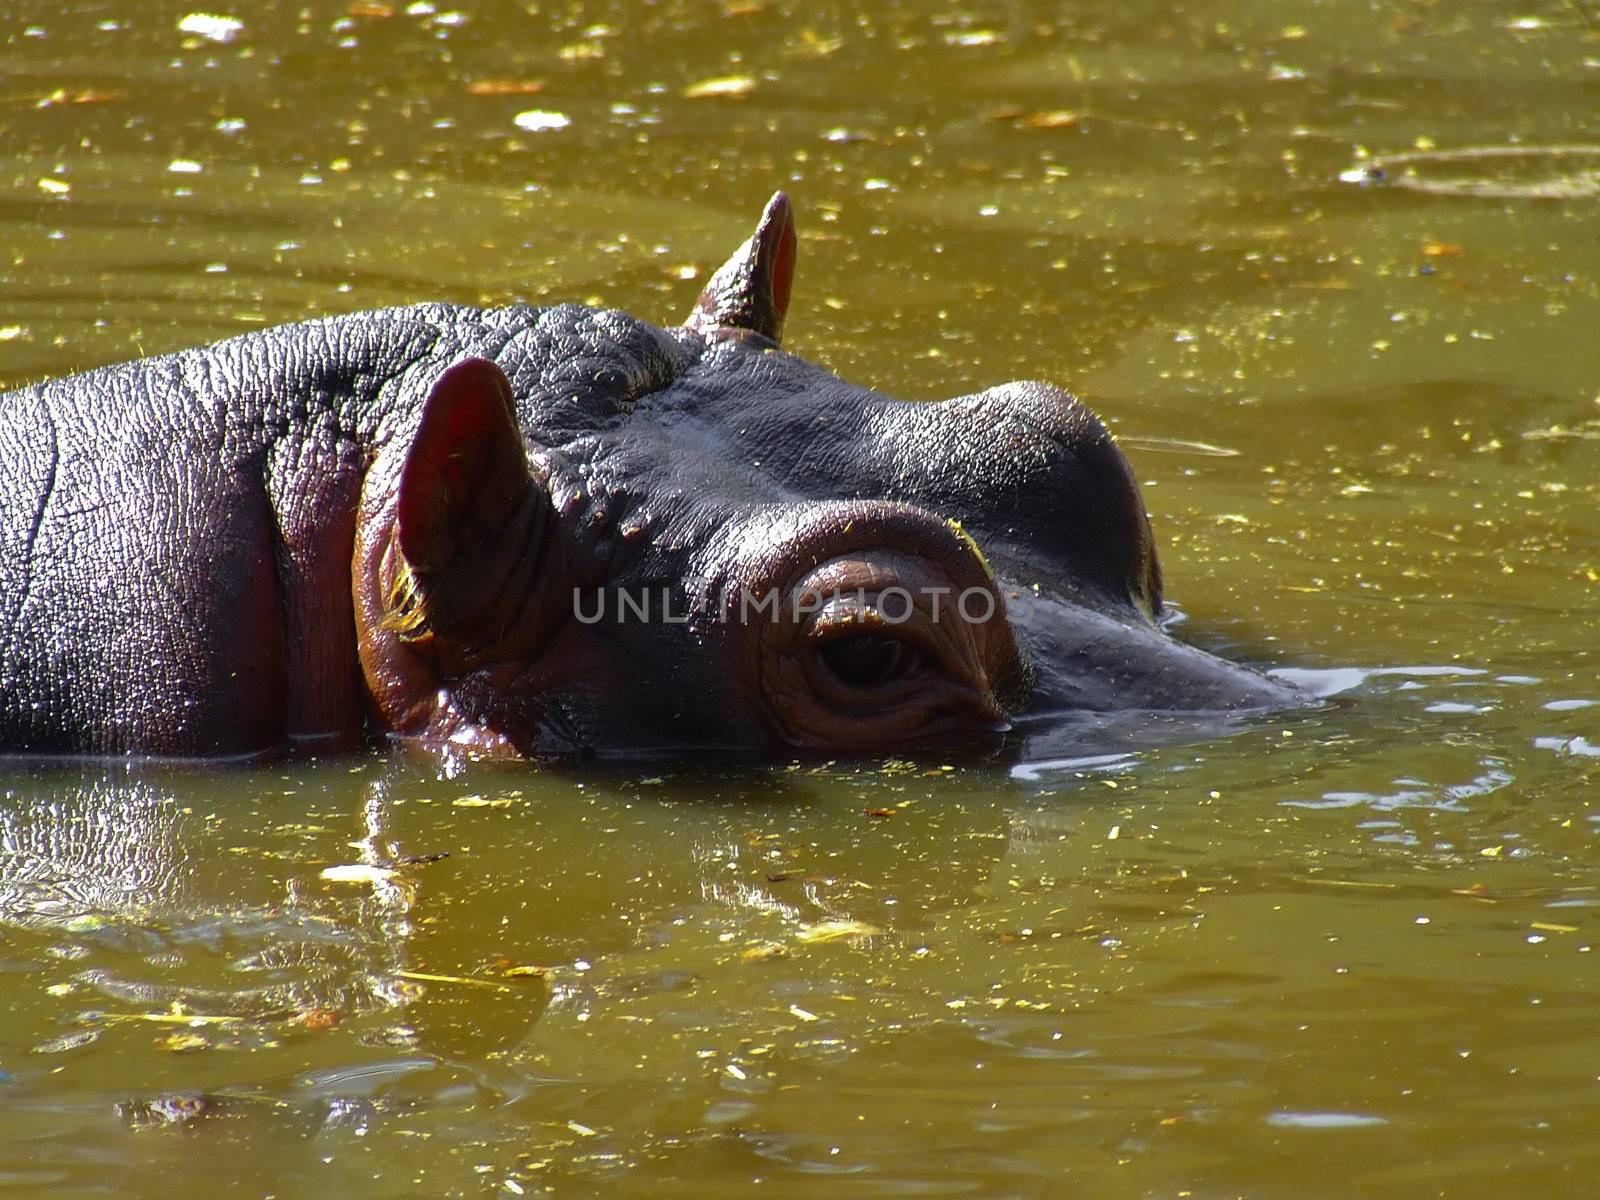 Hippo in the water by PauloResende